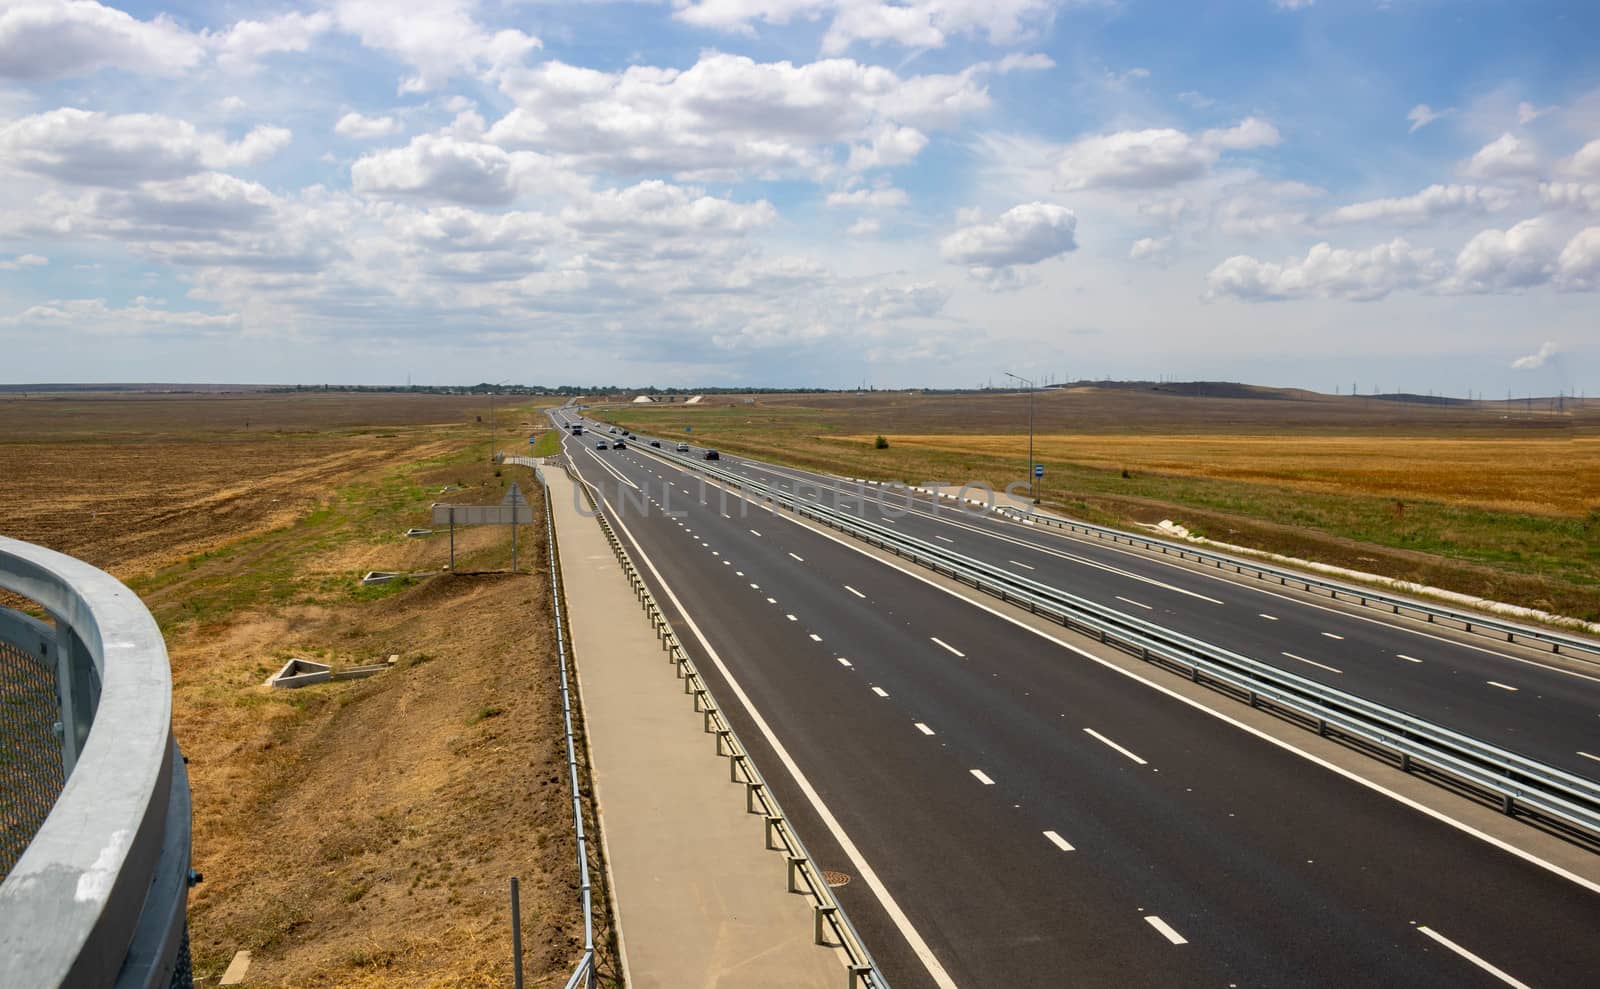 highway in the steppe against the blue sky, a long road stretching into the distance. by lapushka62